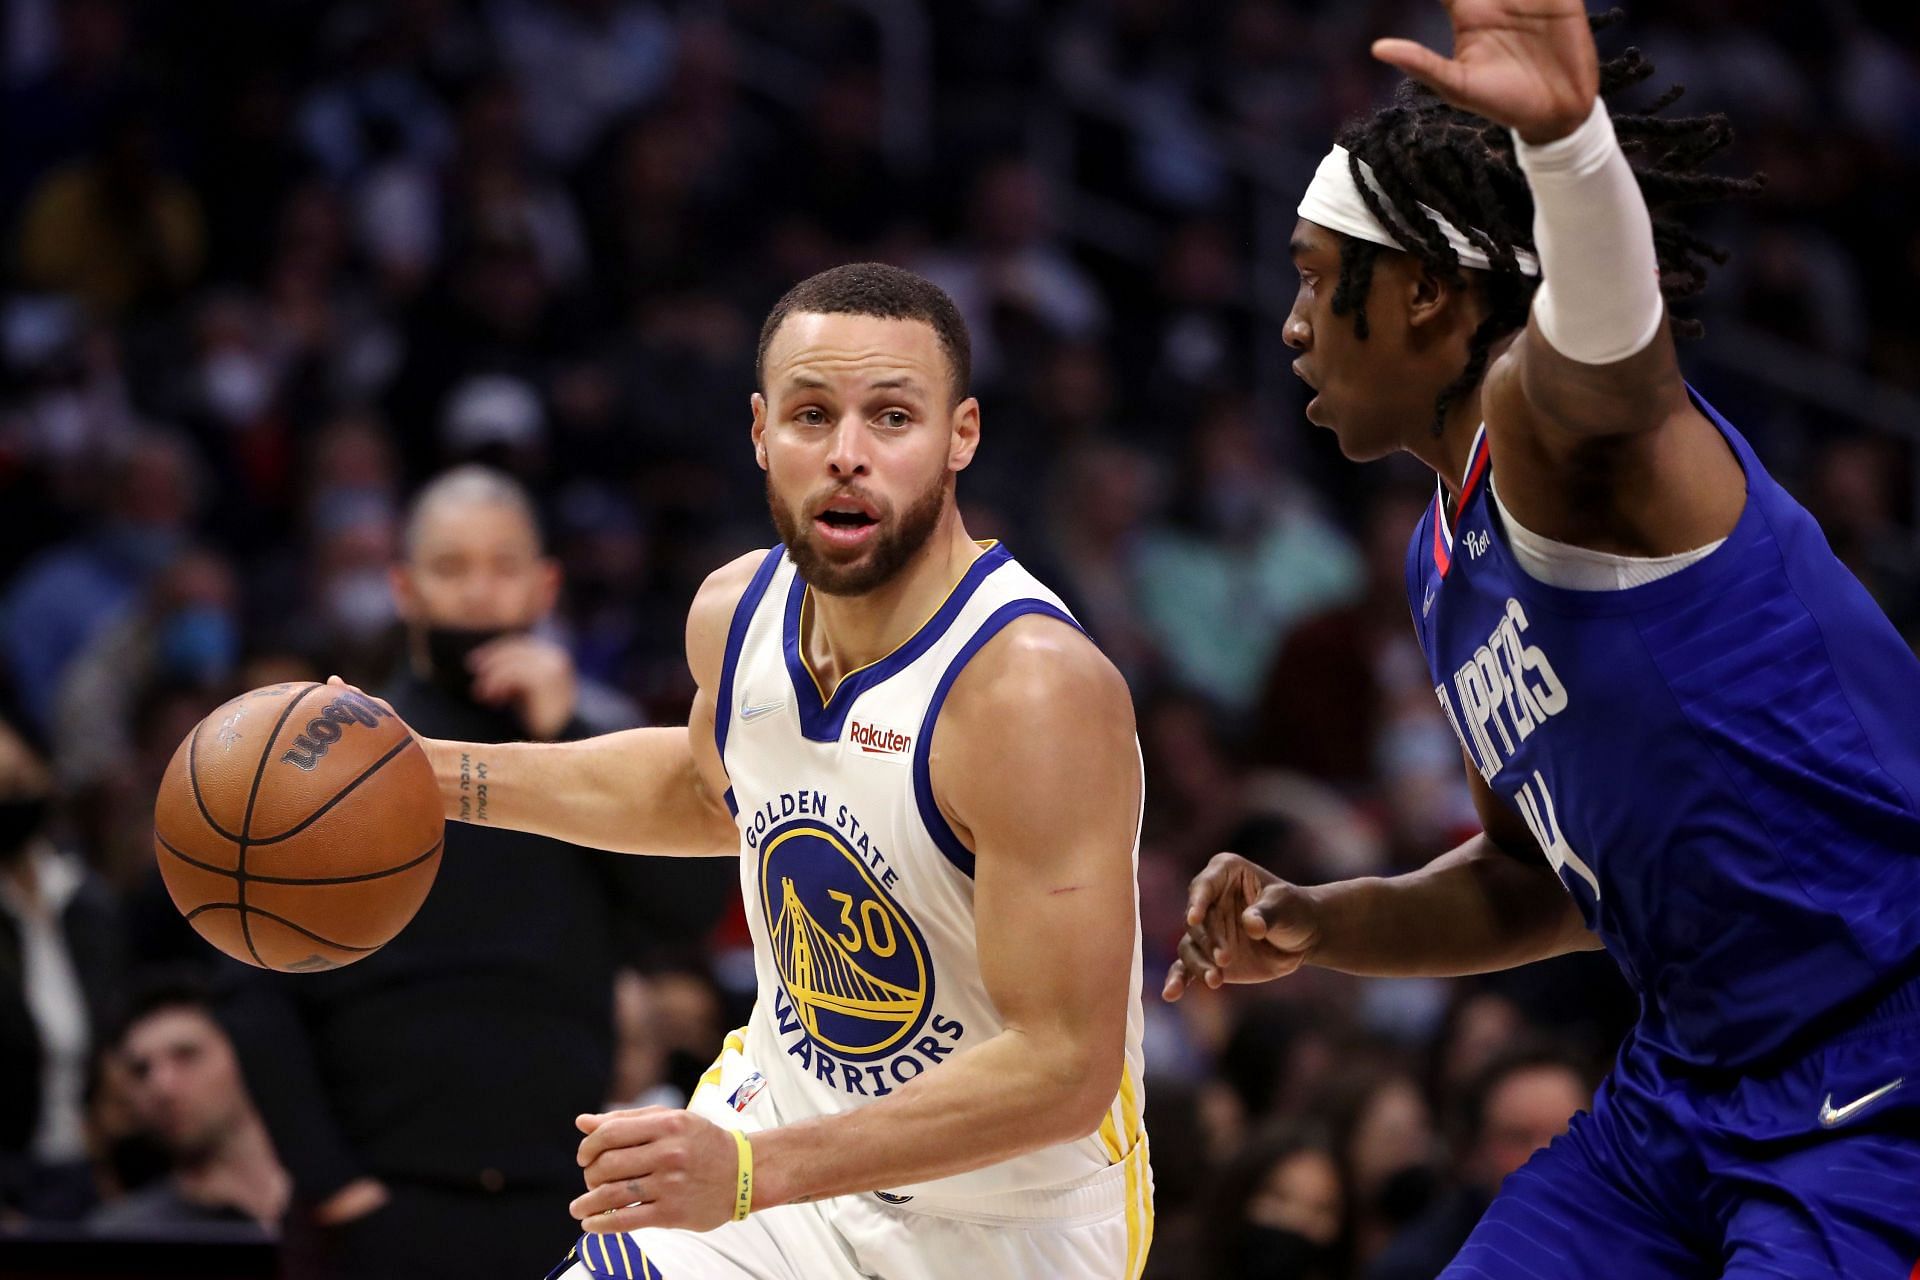 Golden State Warriors guard Steph Curry drives against LA Clippers forward Terance Mann.